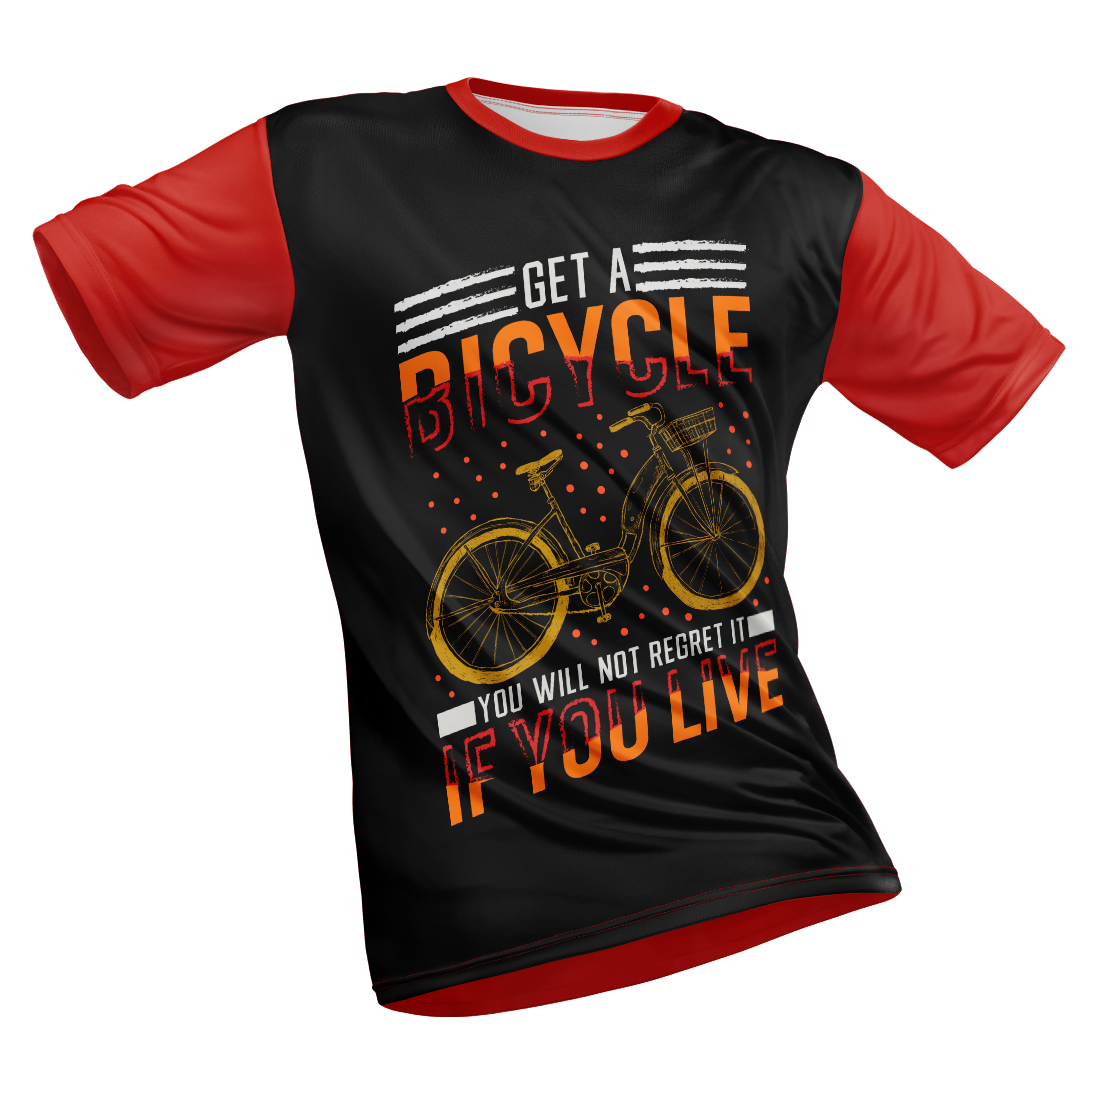 Polyester Half Sleeve T-Shirt with Round Collar and All Over Digital Print.